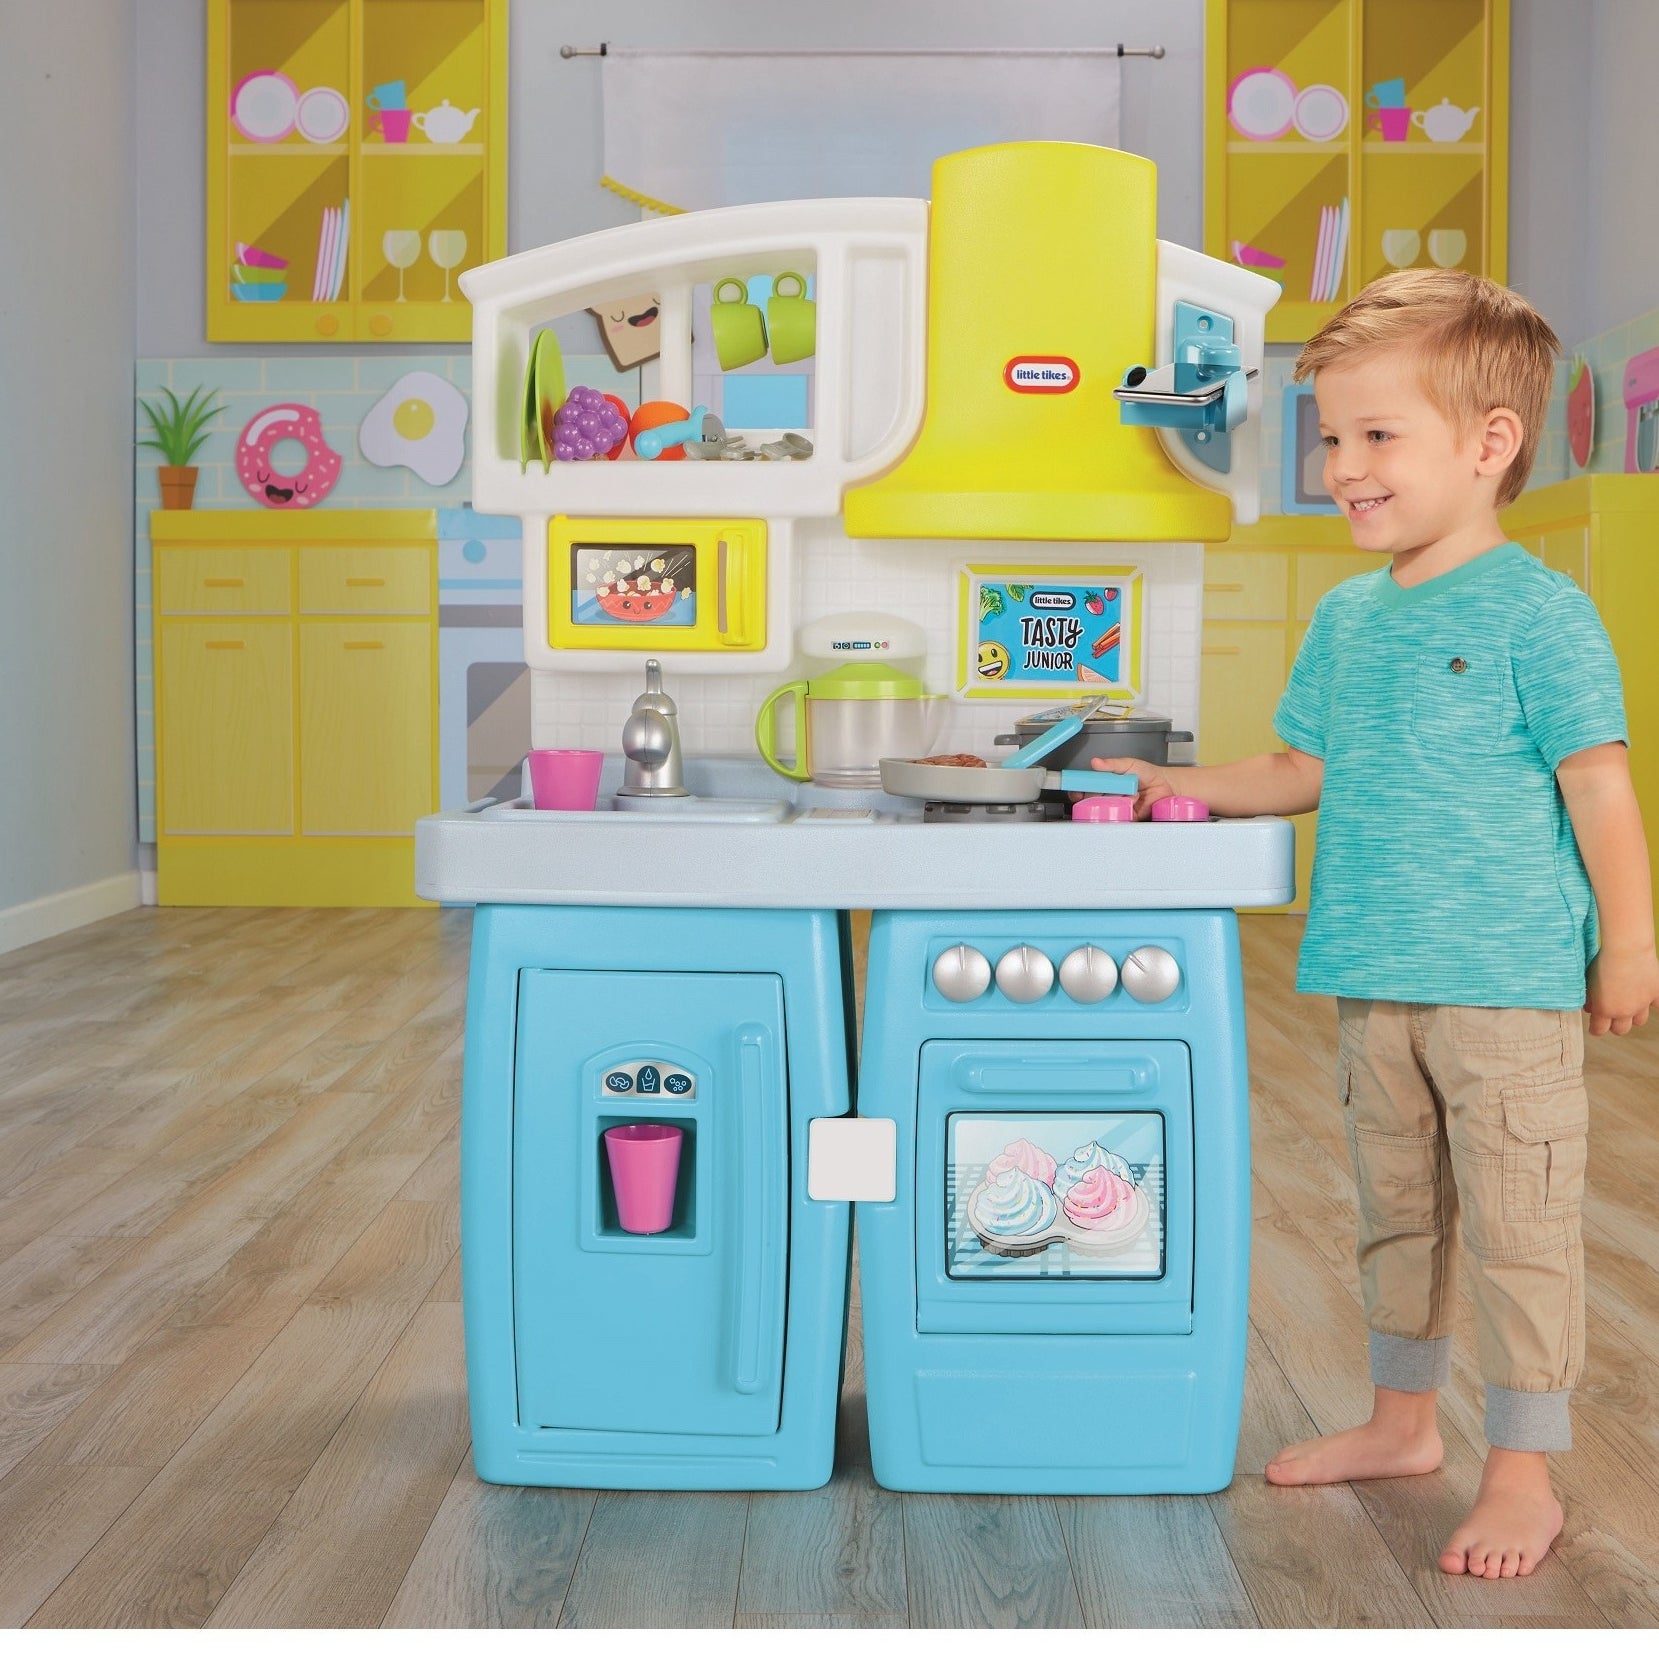 Tasty S New Line Of Toys With Little Tikes Is So Cute I Wish They